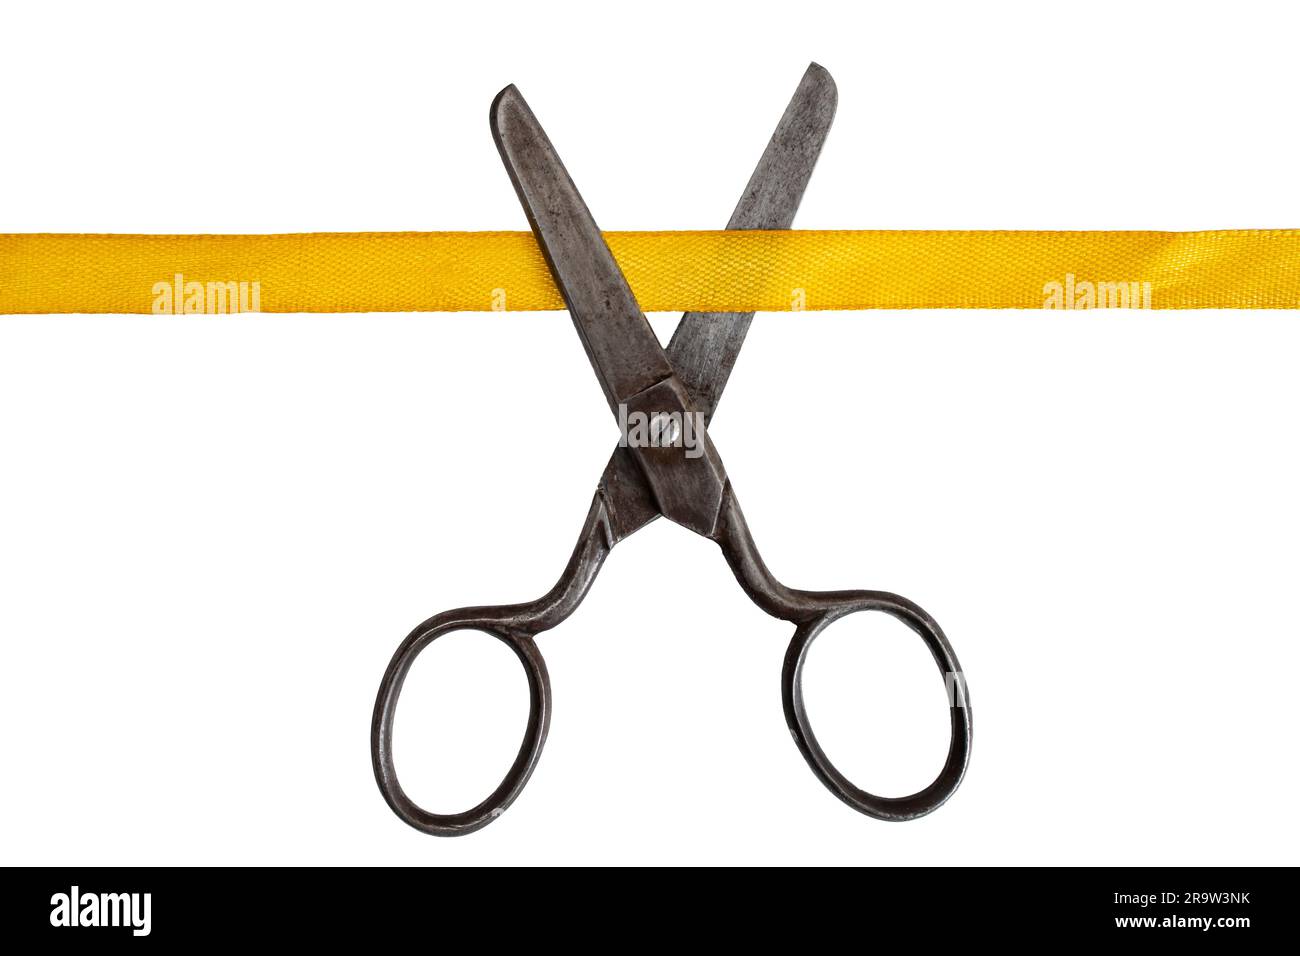 Vintage steel scissors cutting a golden satin ribbon, close up isolated on white Stock Photo